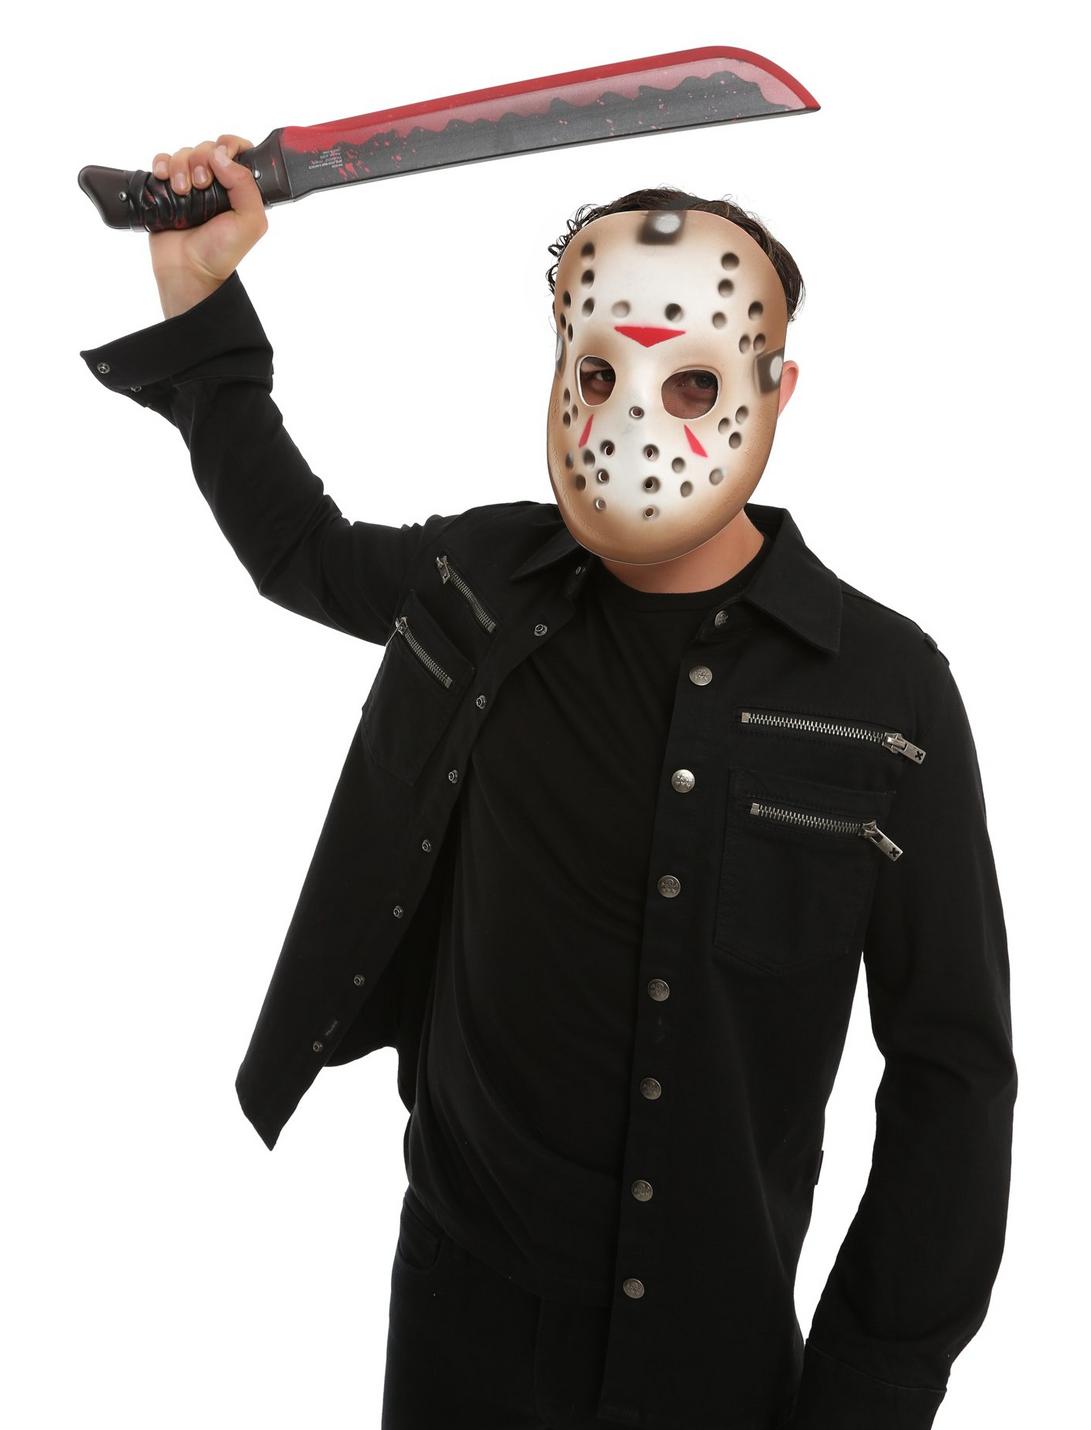 Friday The 13th Jason Voorhees Mask And Machete Costume Kit, , hi-res